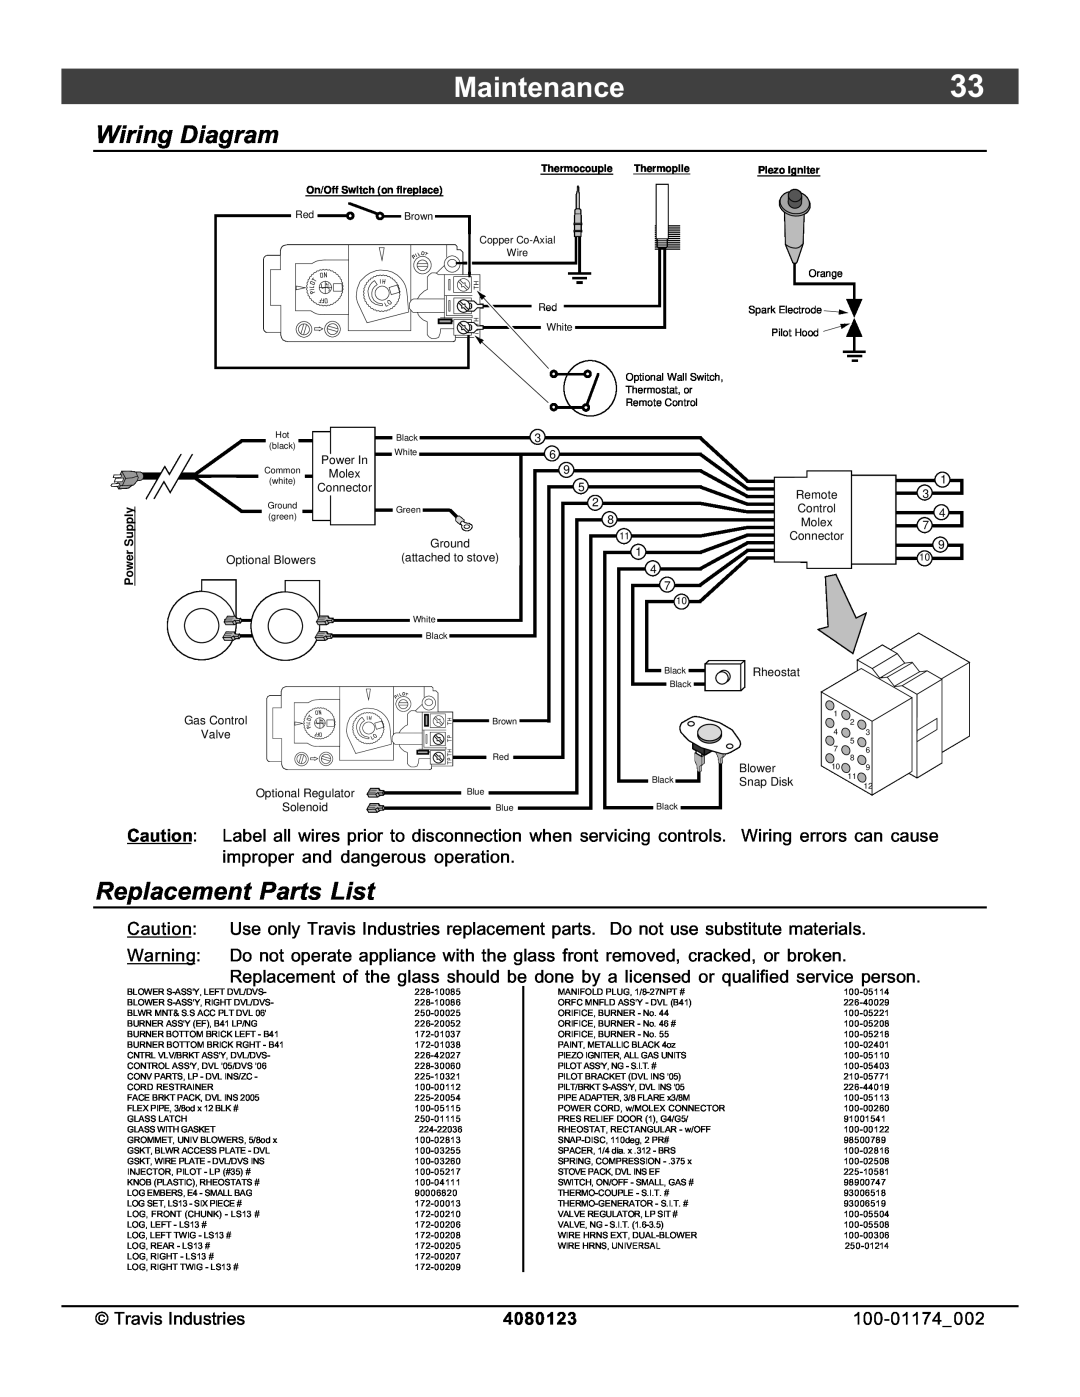 Avalon Stoves DVL Insert EF II owner manual Maintenance33, Wiring Diagram, Replacement Parts List, 4080123 